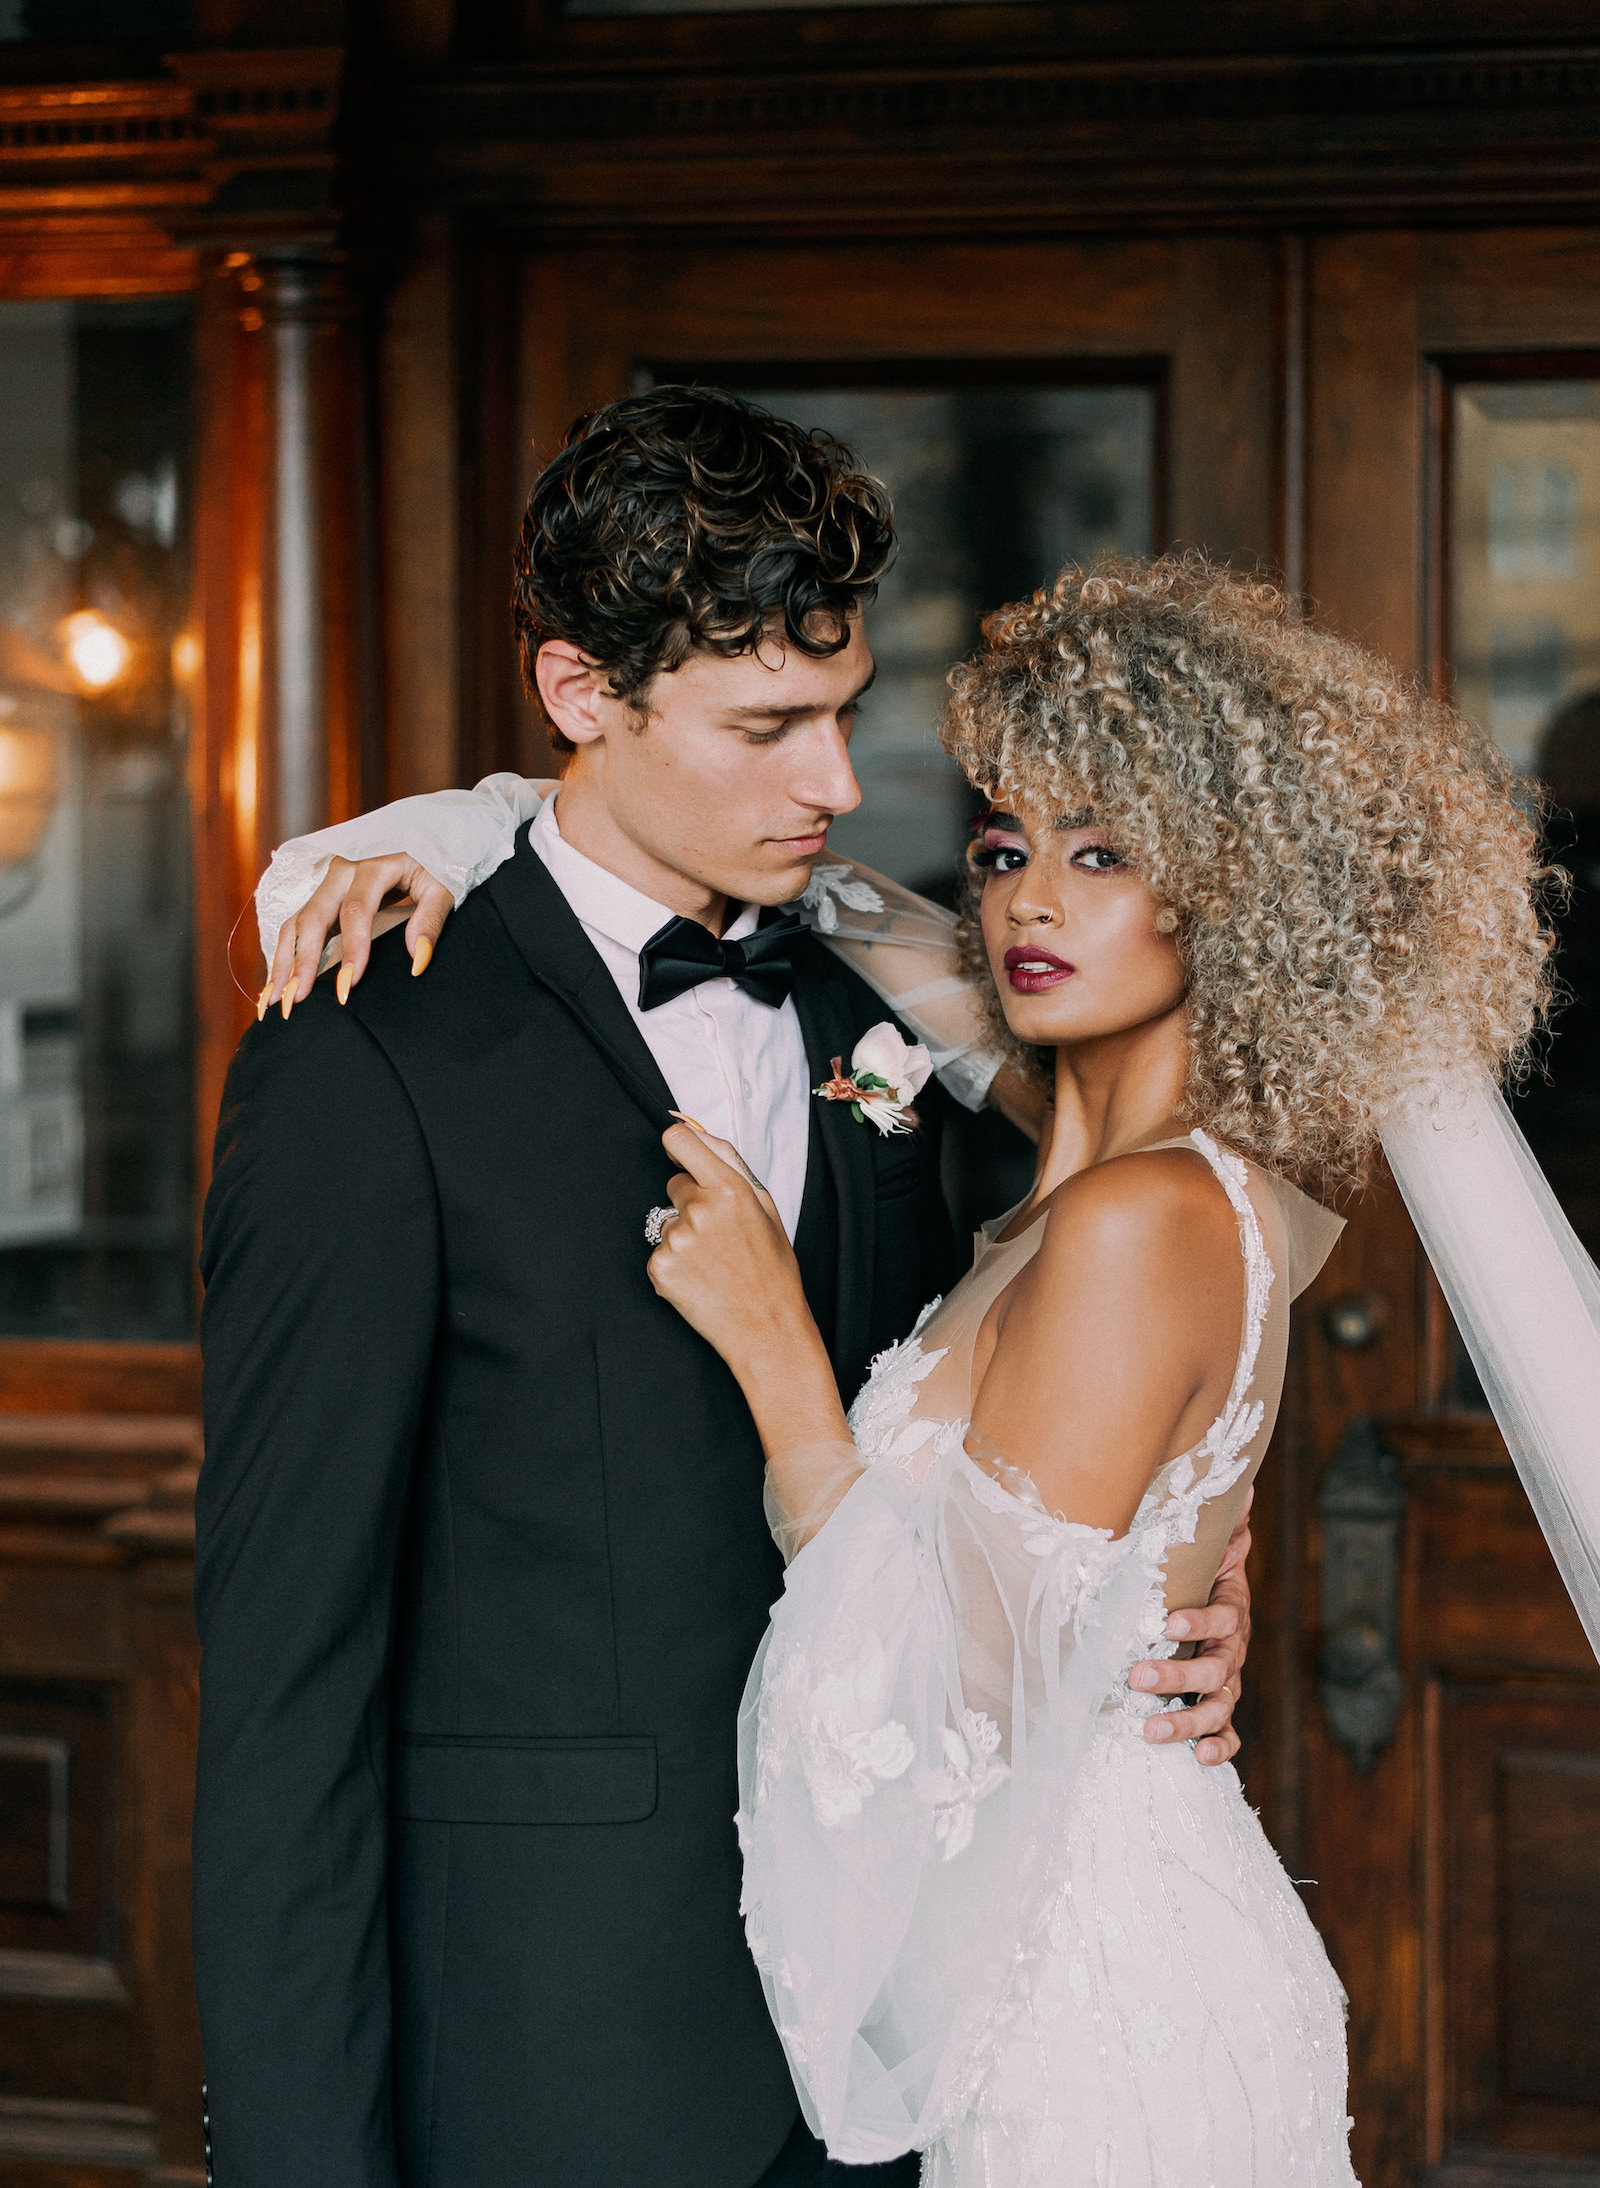 Vintage European Bride Wearing Lace and Tulle Puff Off the Shoulder Long Sleeve Wedding Dress and Groom Wearing Black Tuxedo | Tampa Bay Wedding Photographer Dewitt for Love